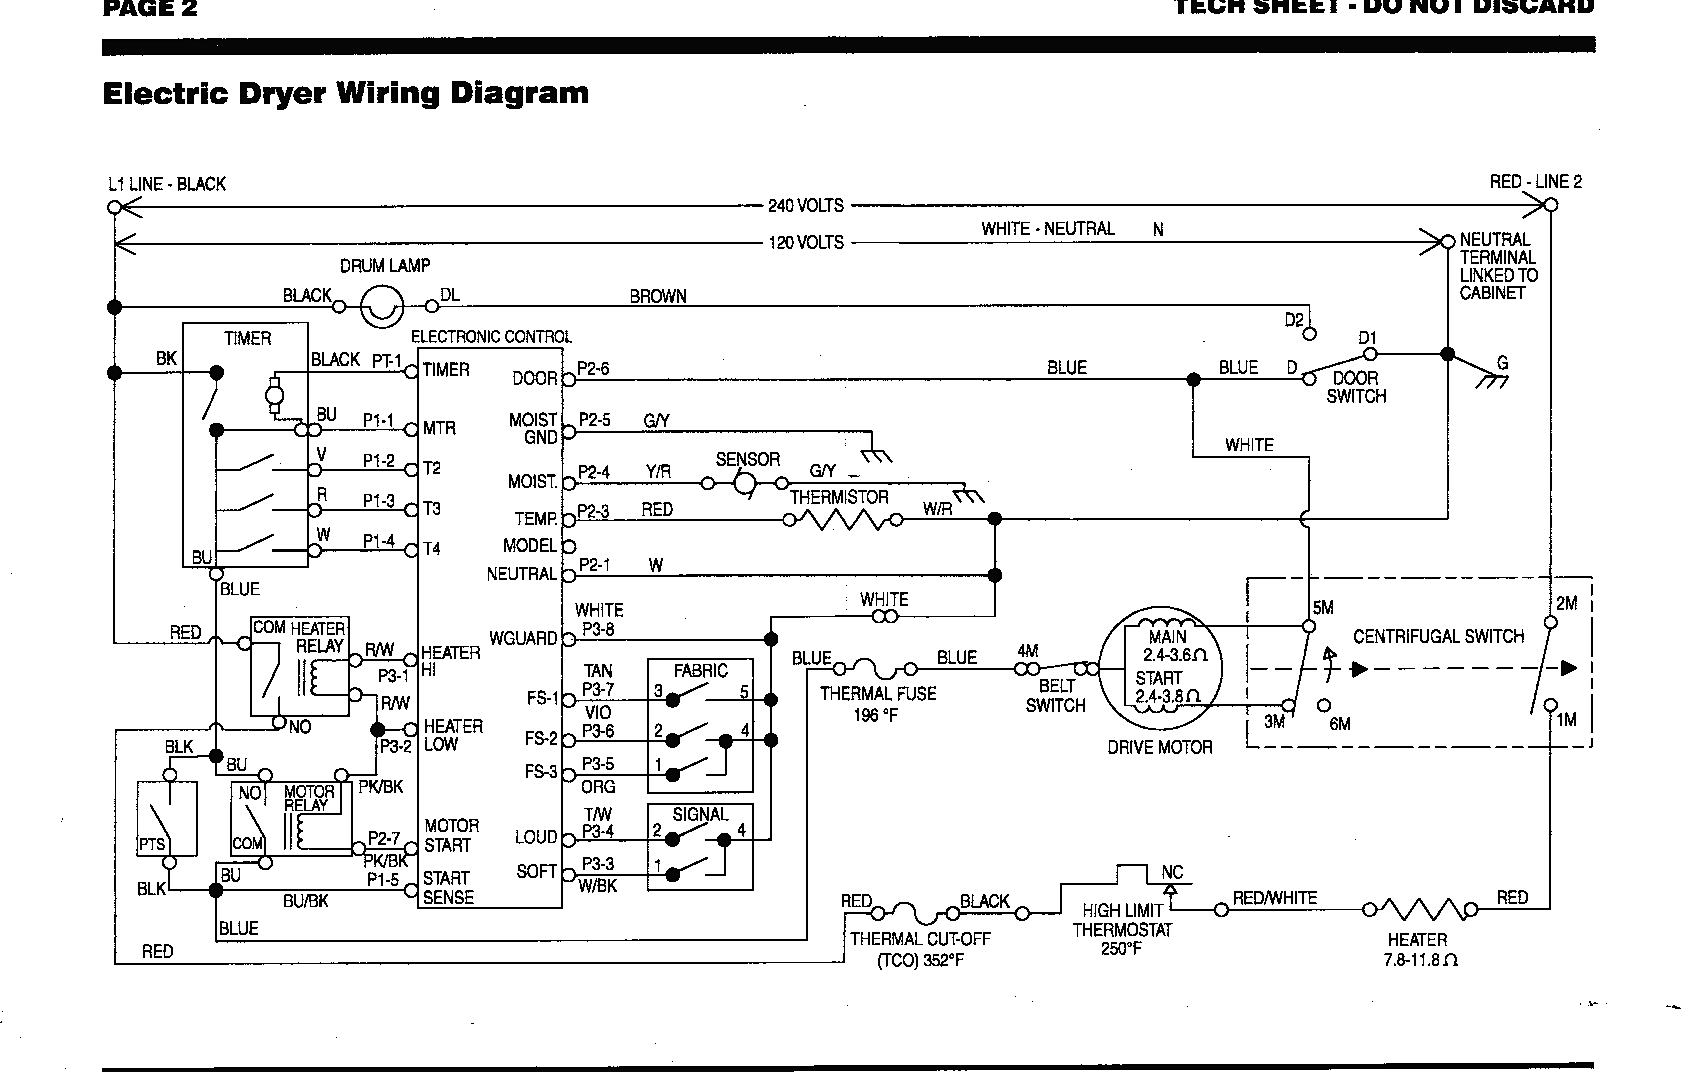 Double Wide Mobile Home Electrical Wiring Diagram Sample | Wiring